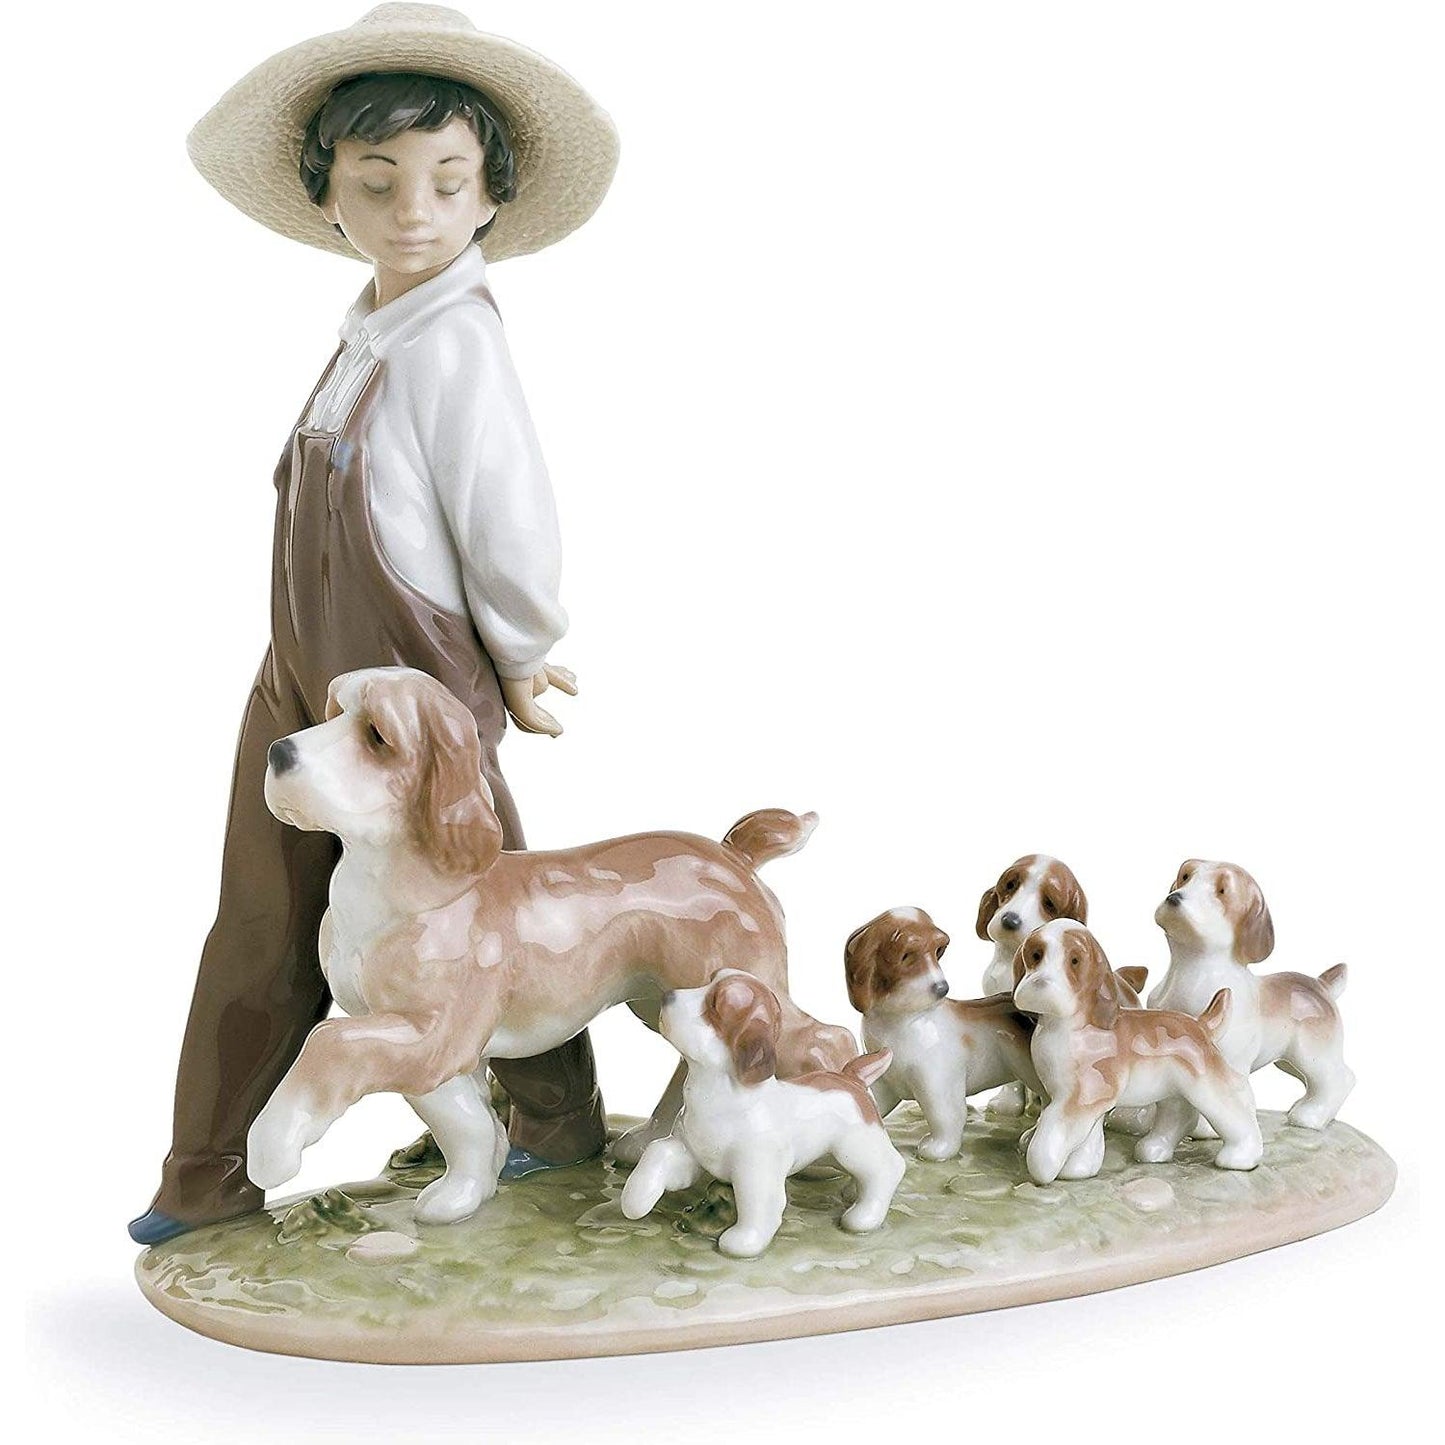 My Little Explorers (Lladro) - Gallery Gifts Online 